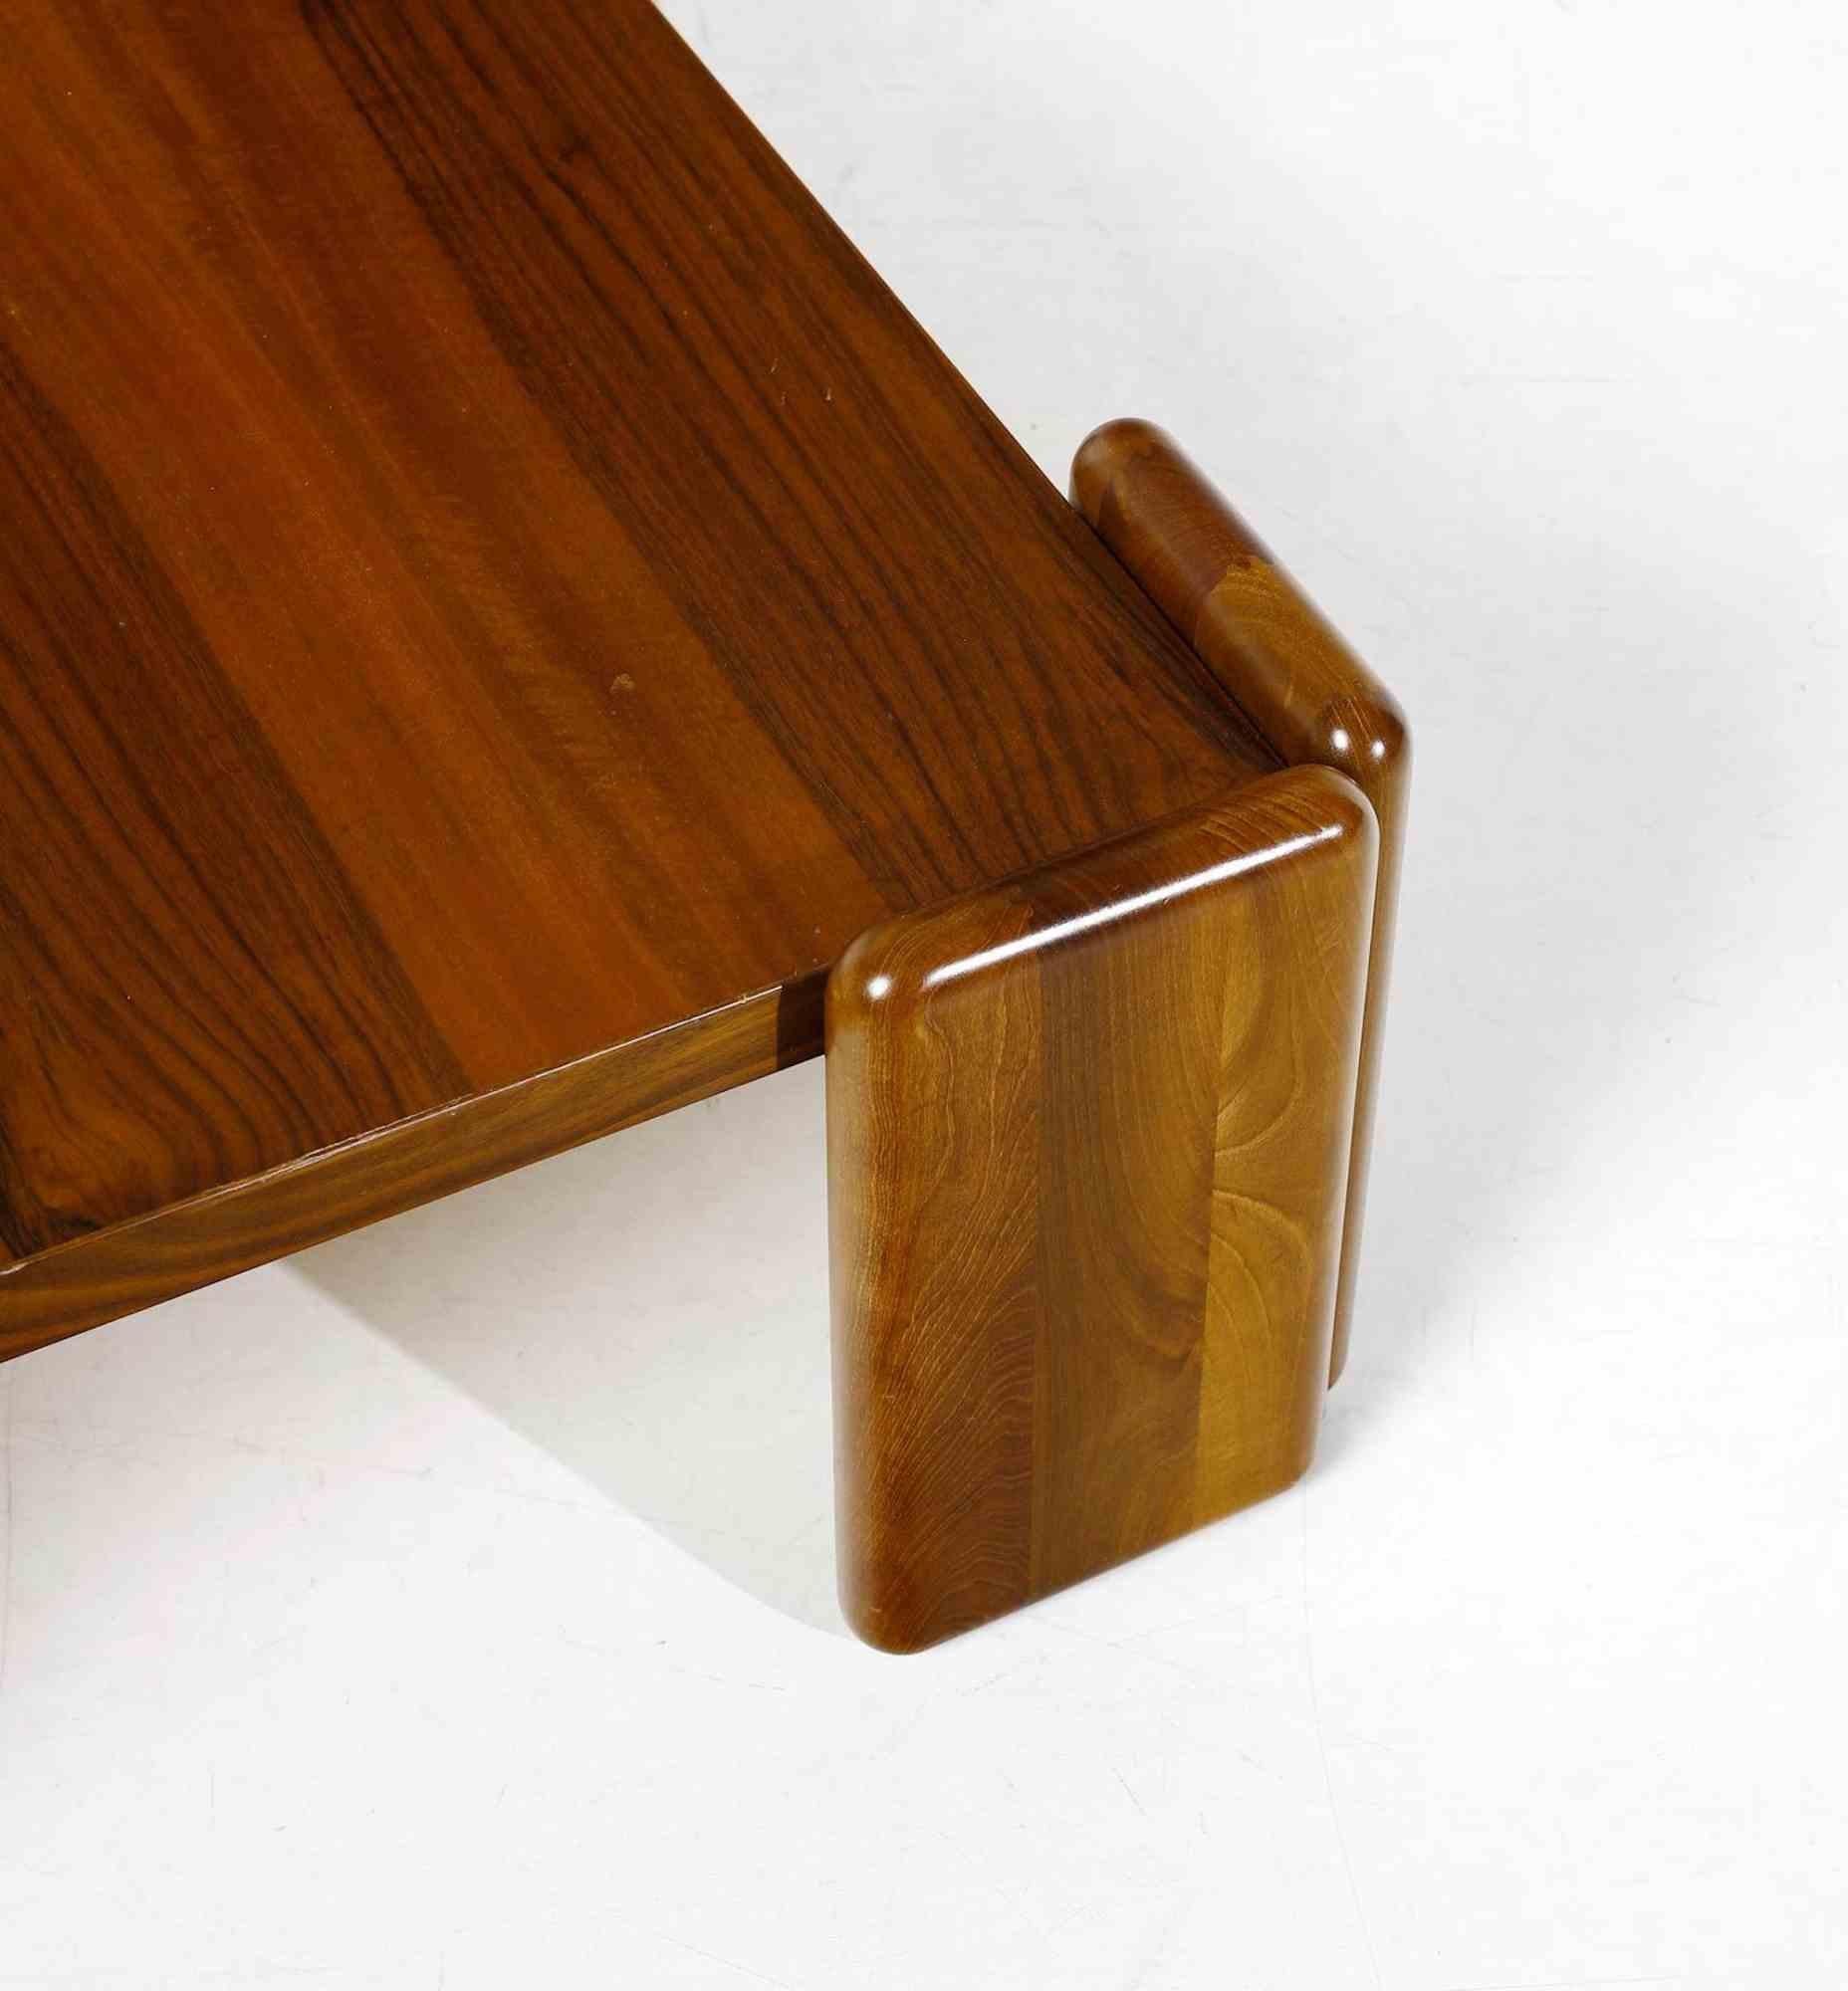 Late 20th Century Coffee Table by Mario Marenco for Mobilgirgi, Italy 1970s For Sale